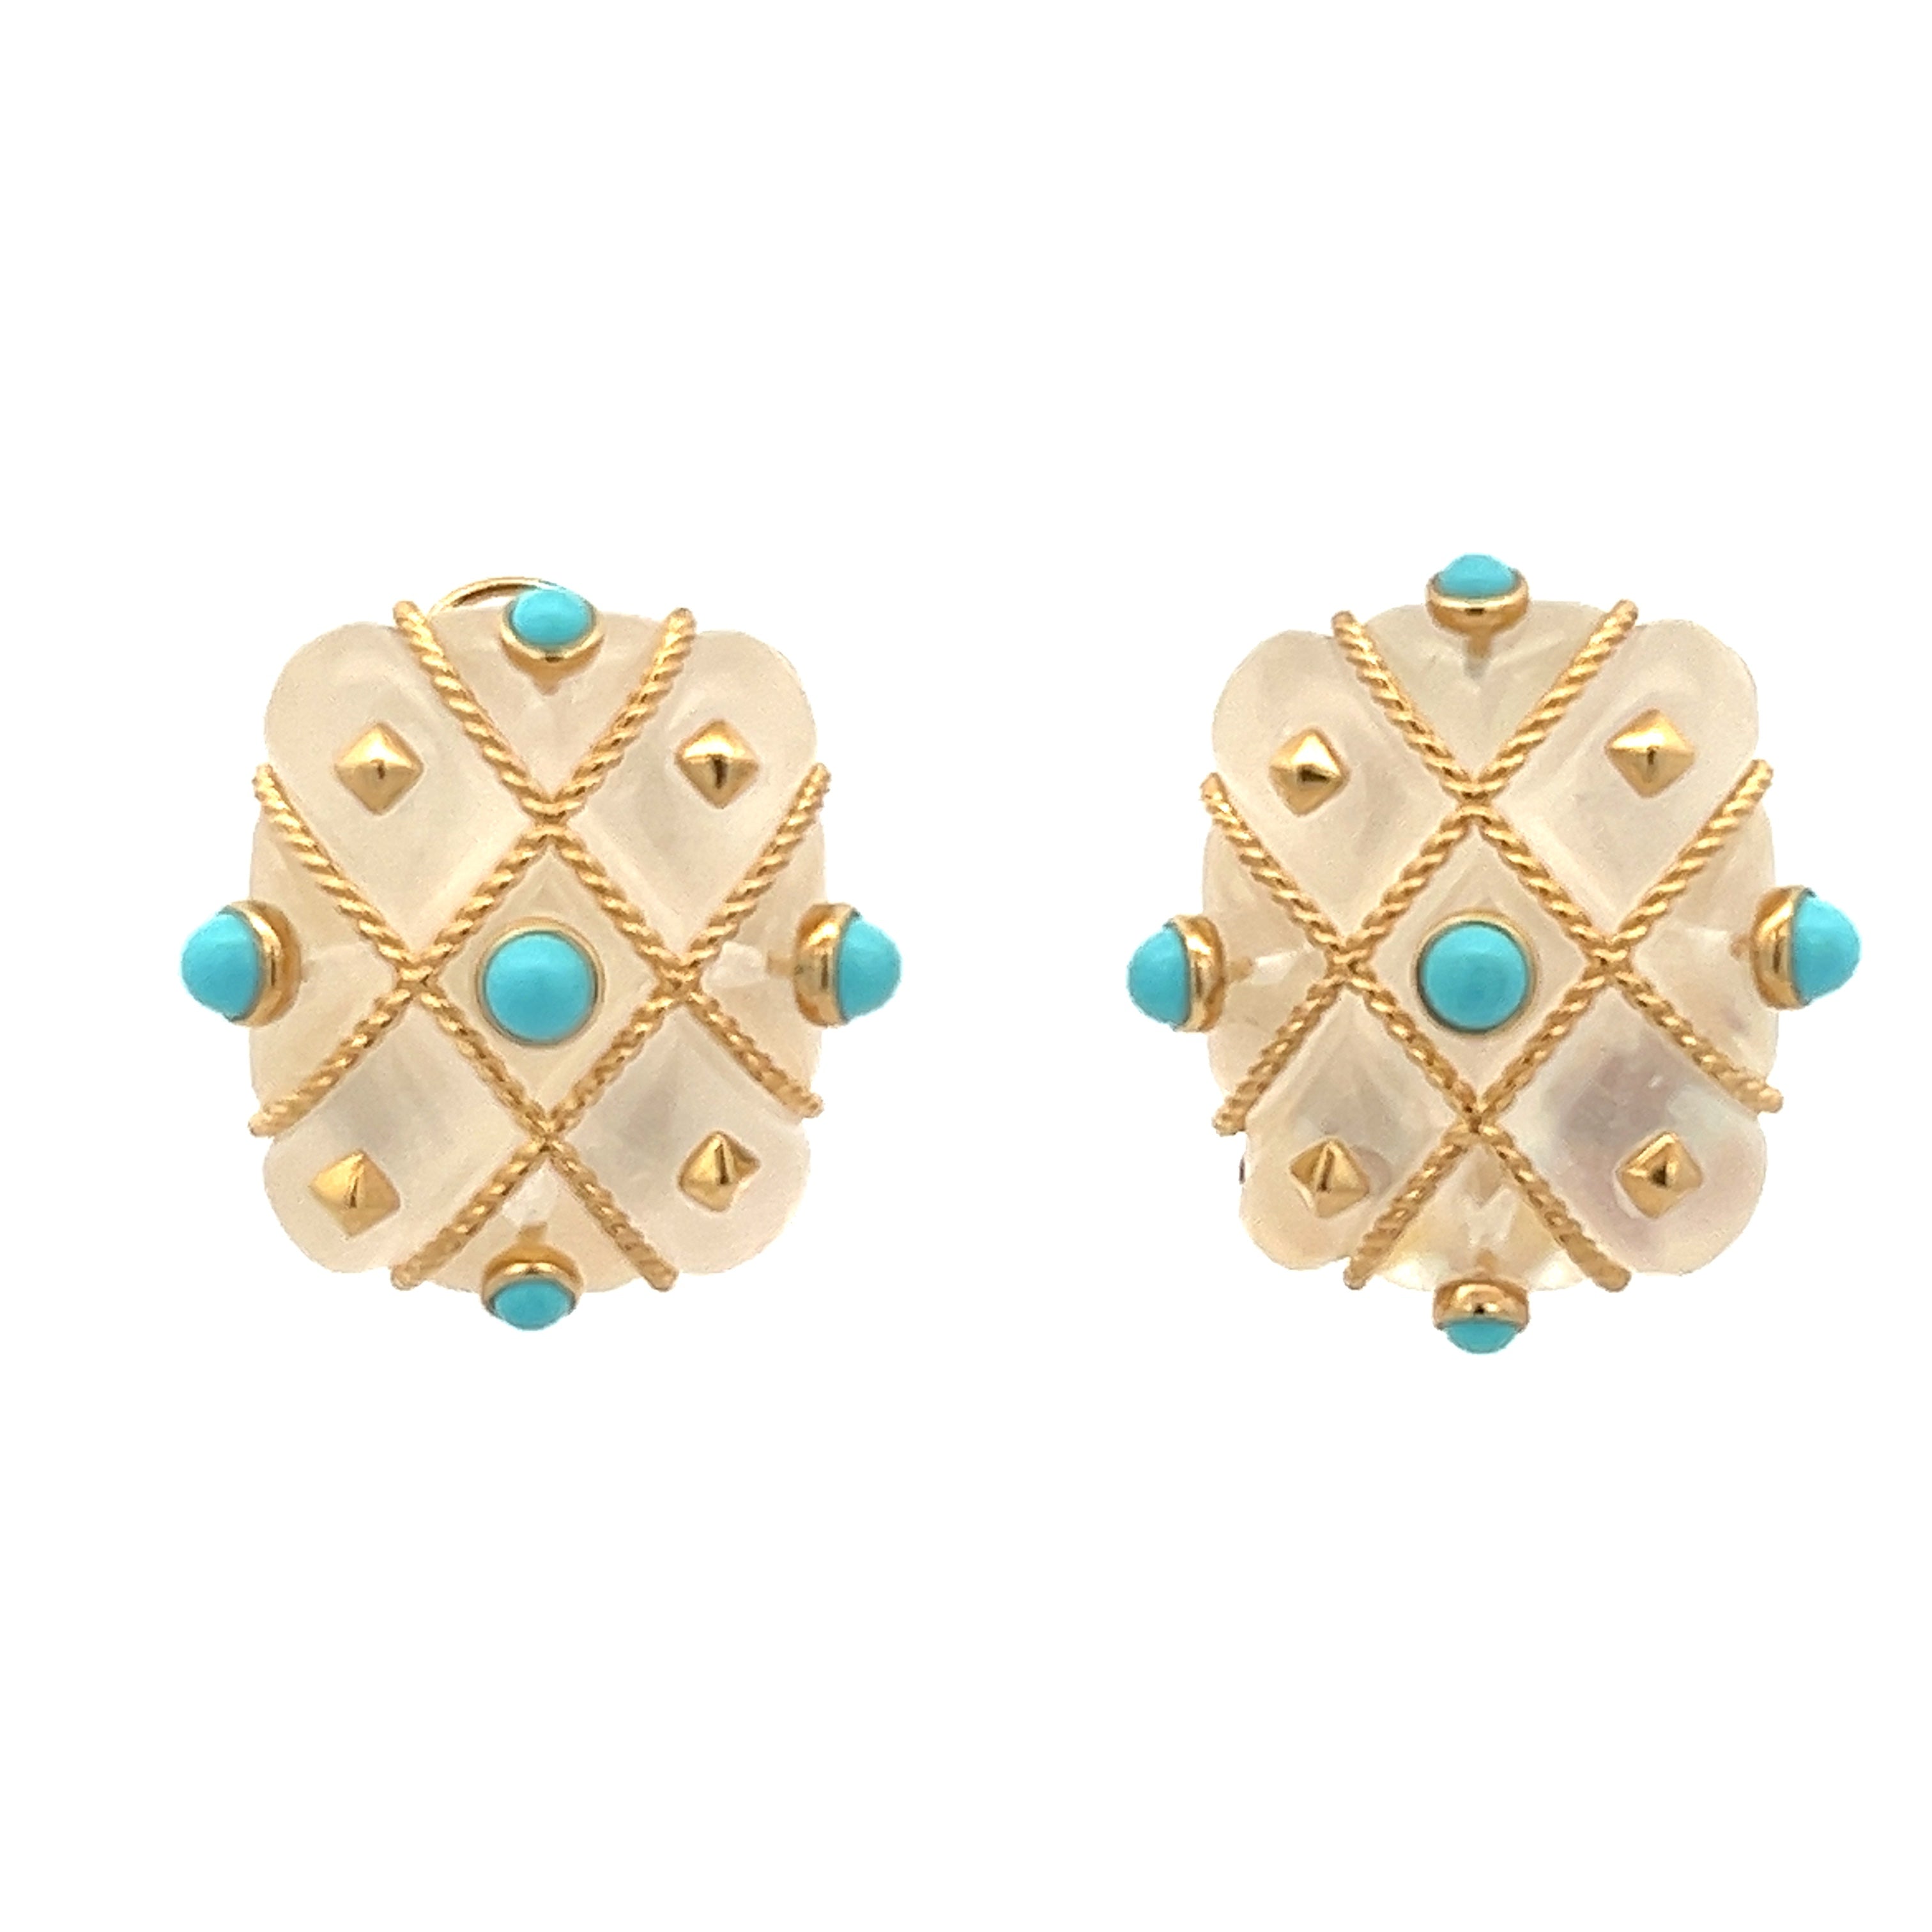 18K GOLD MOTHER OF PEARL AND TURQUOISE EARRINGS